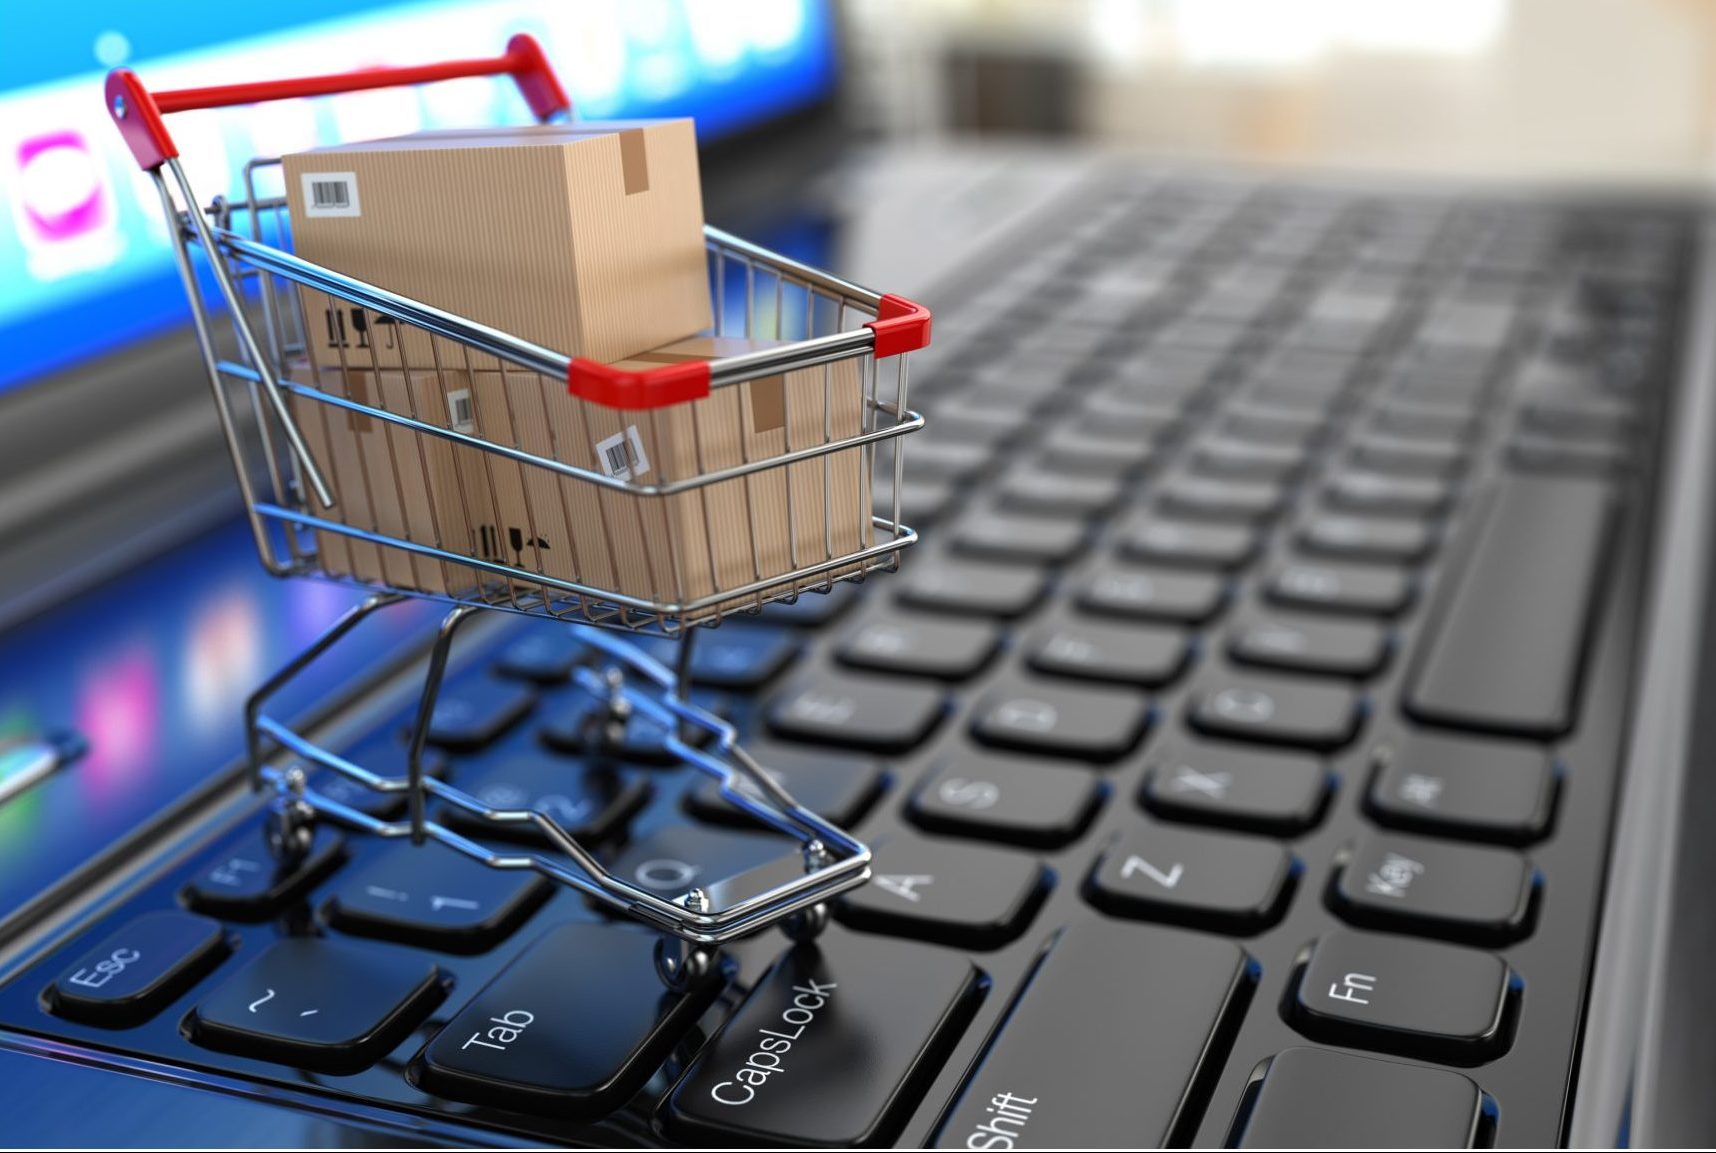 The most popular types of e-commerce